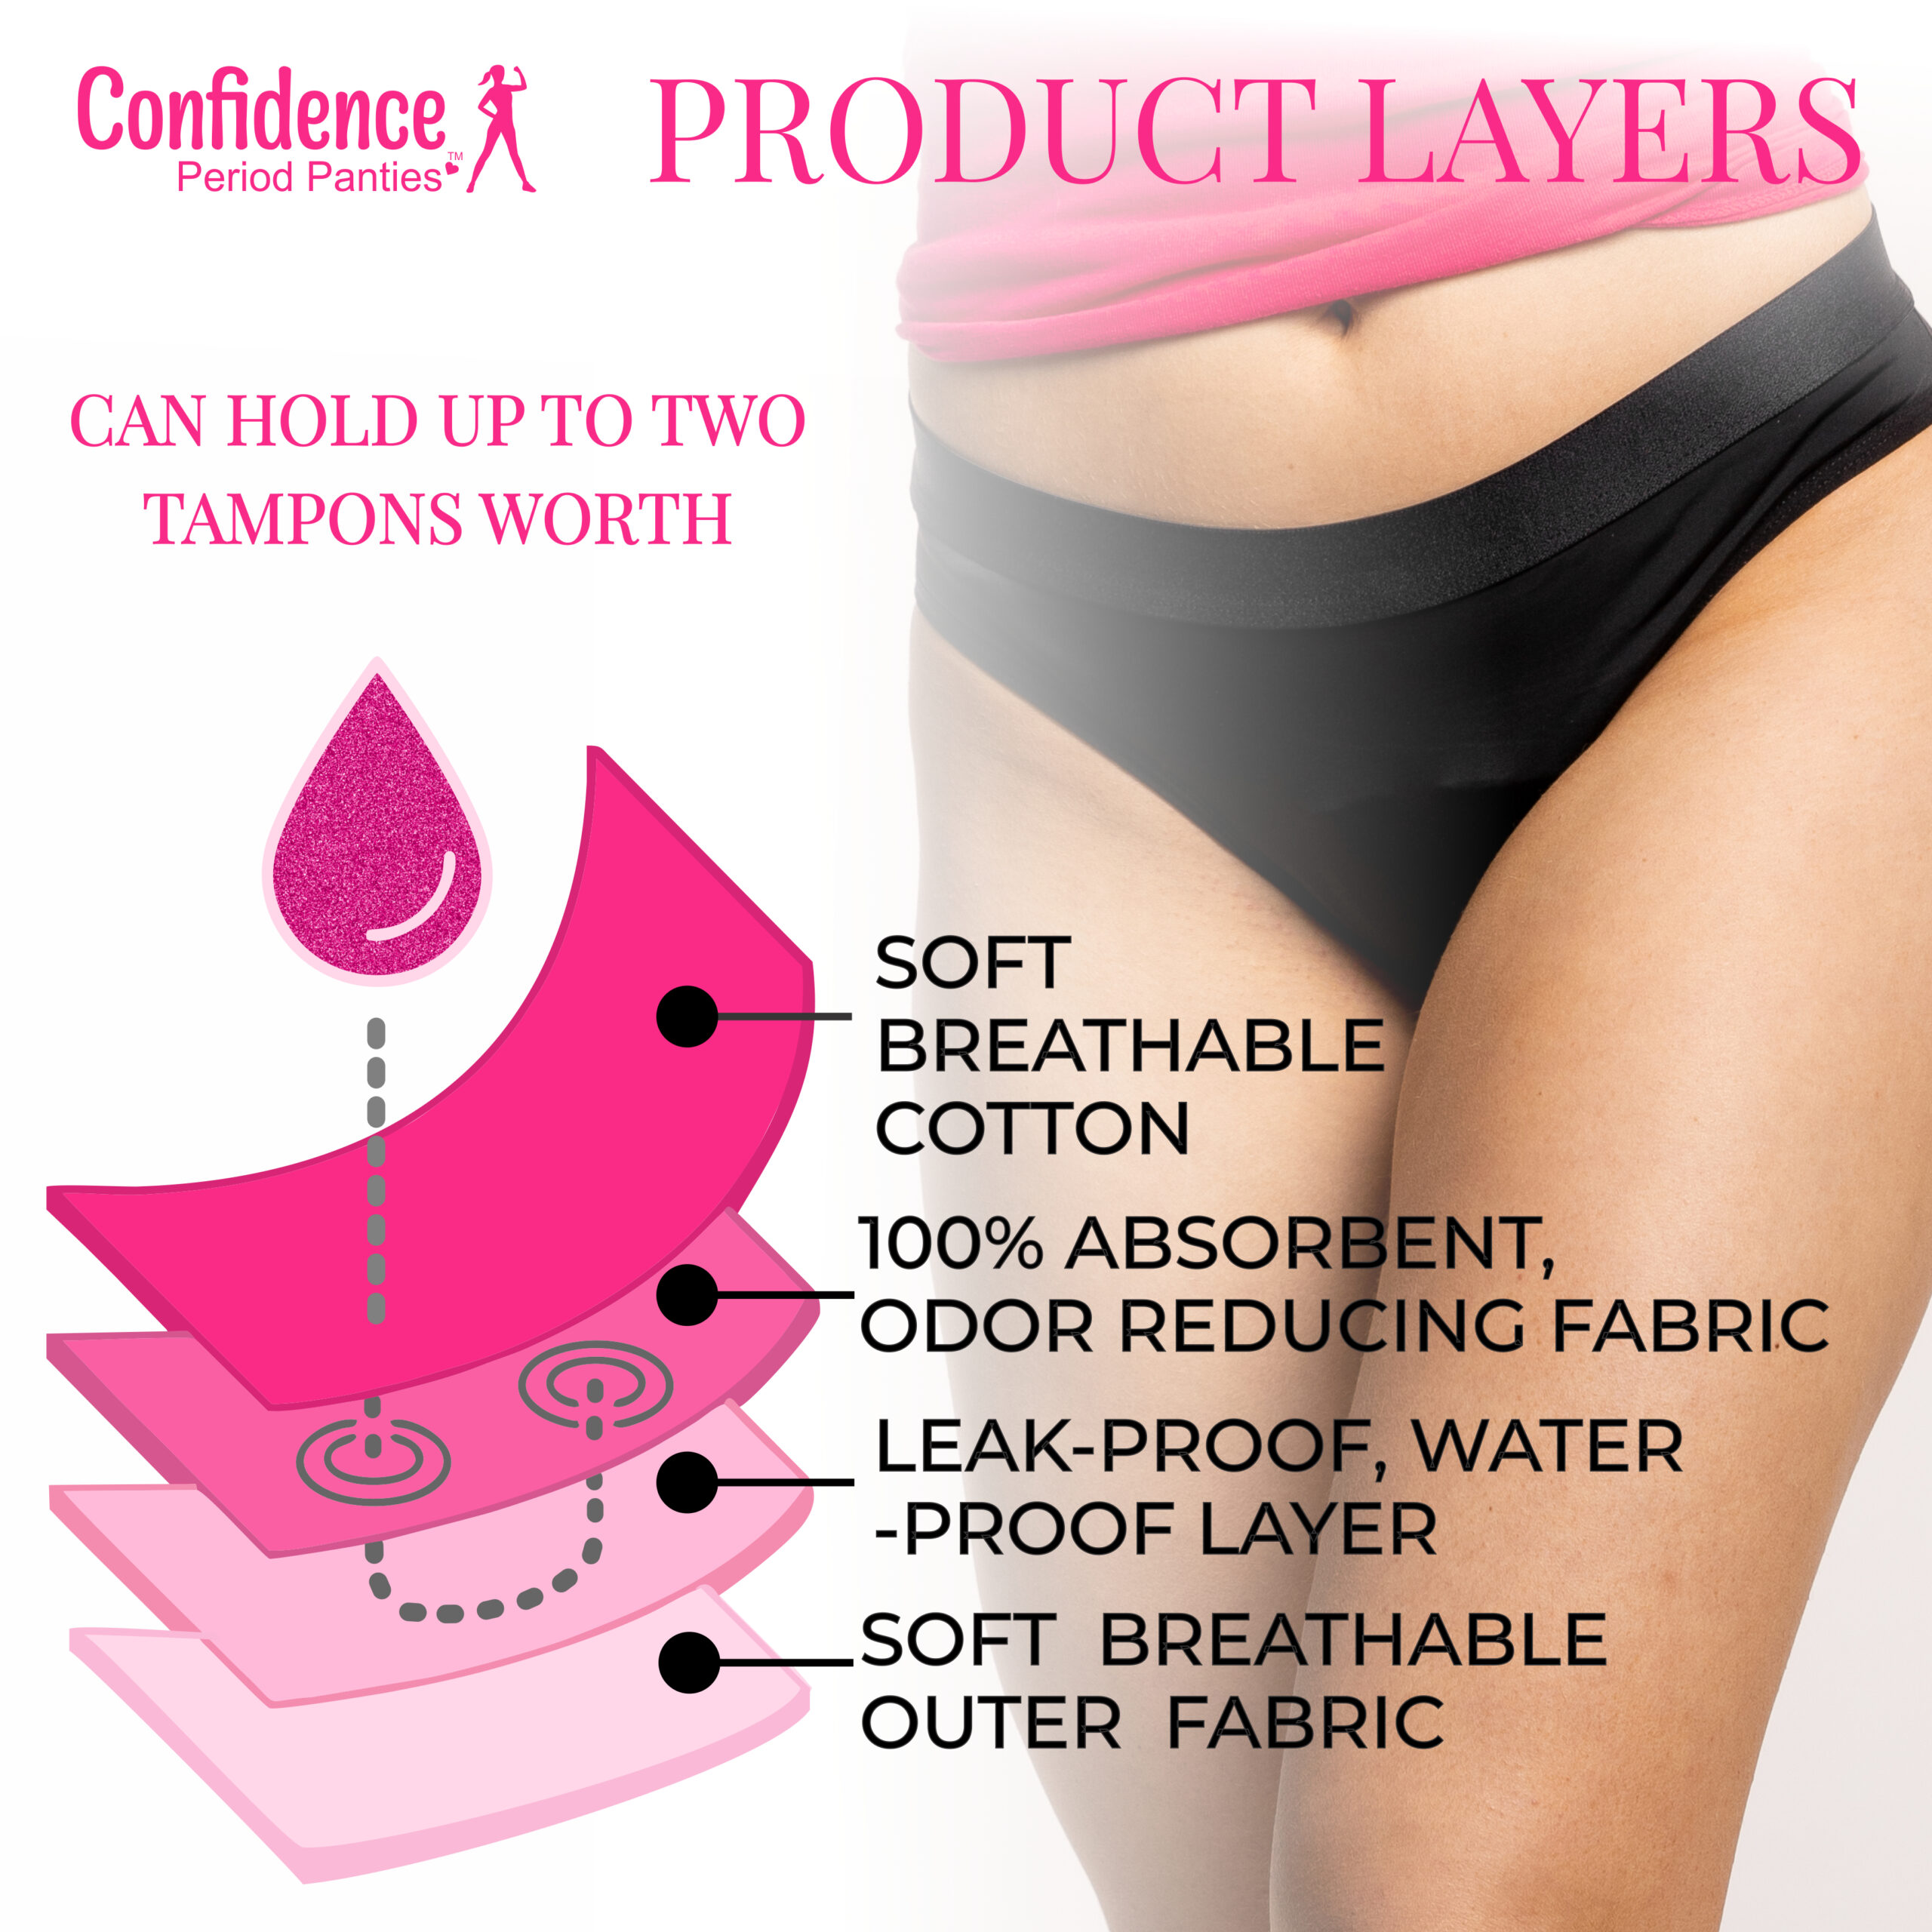 Frequently Asked Questions - Confidence Period Panties